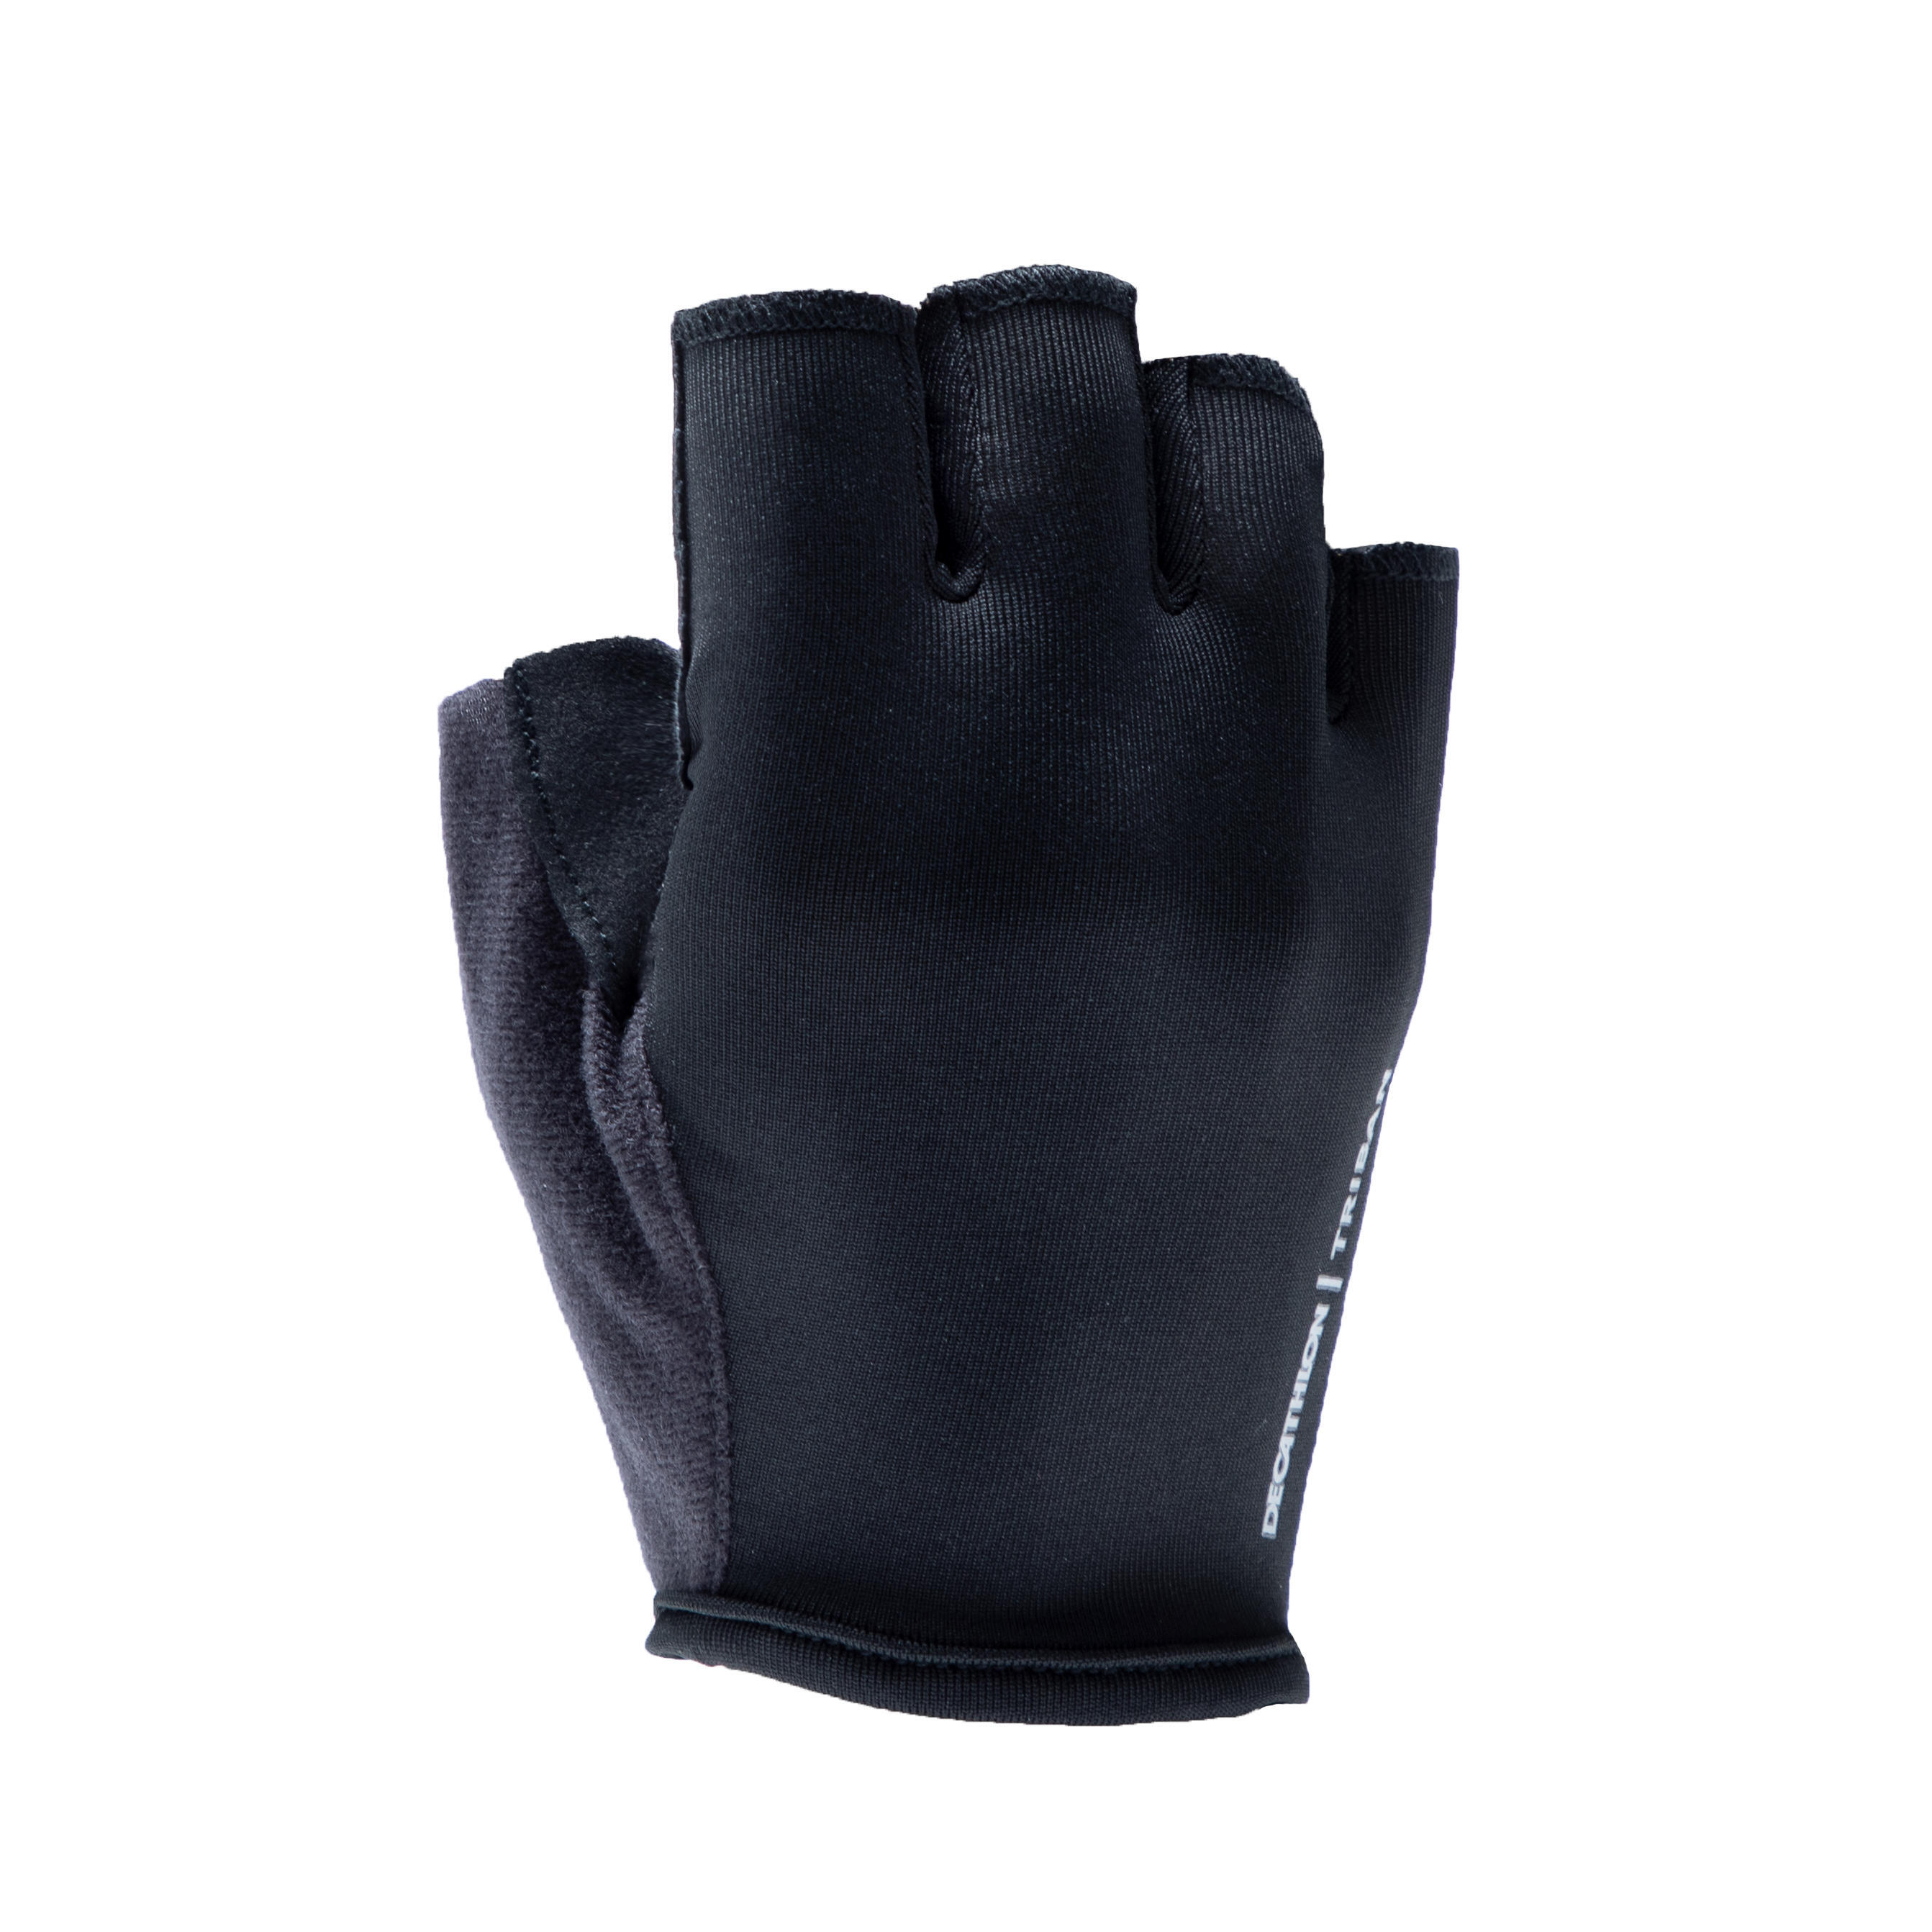 TRIBAN Road Cycling Cycle Touring Gloves 100 - Black